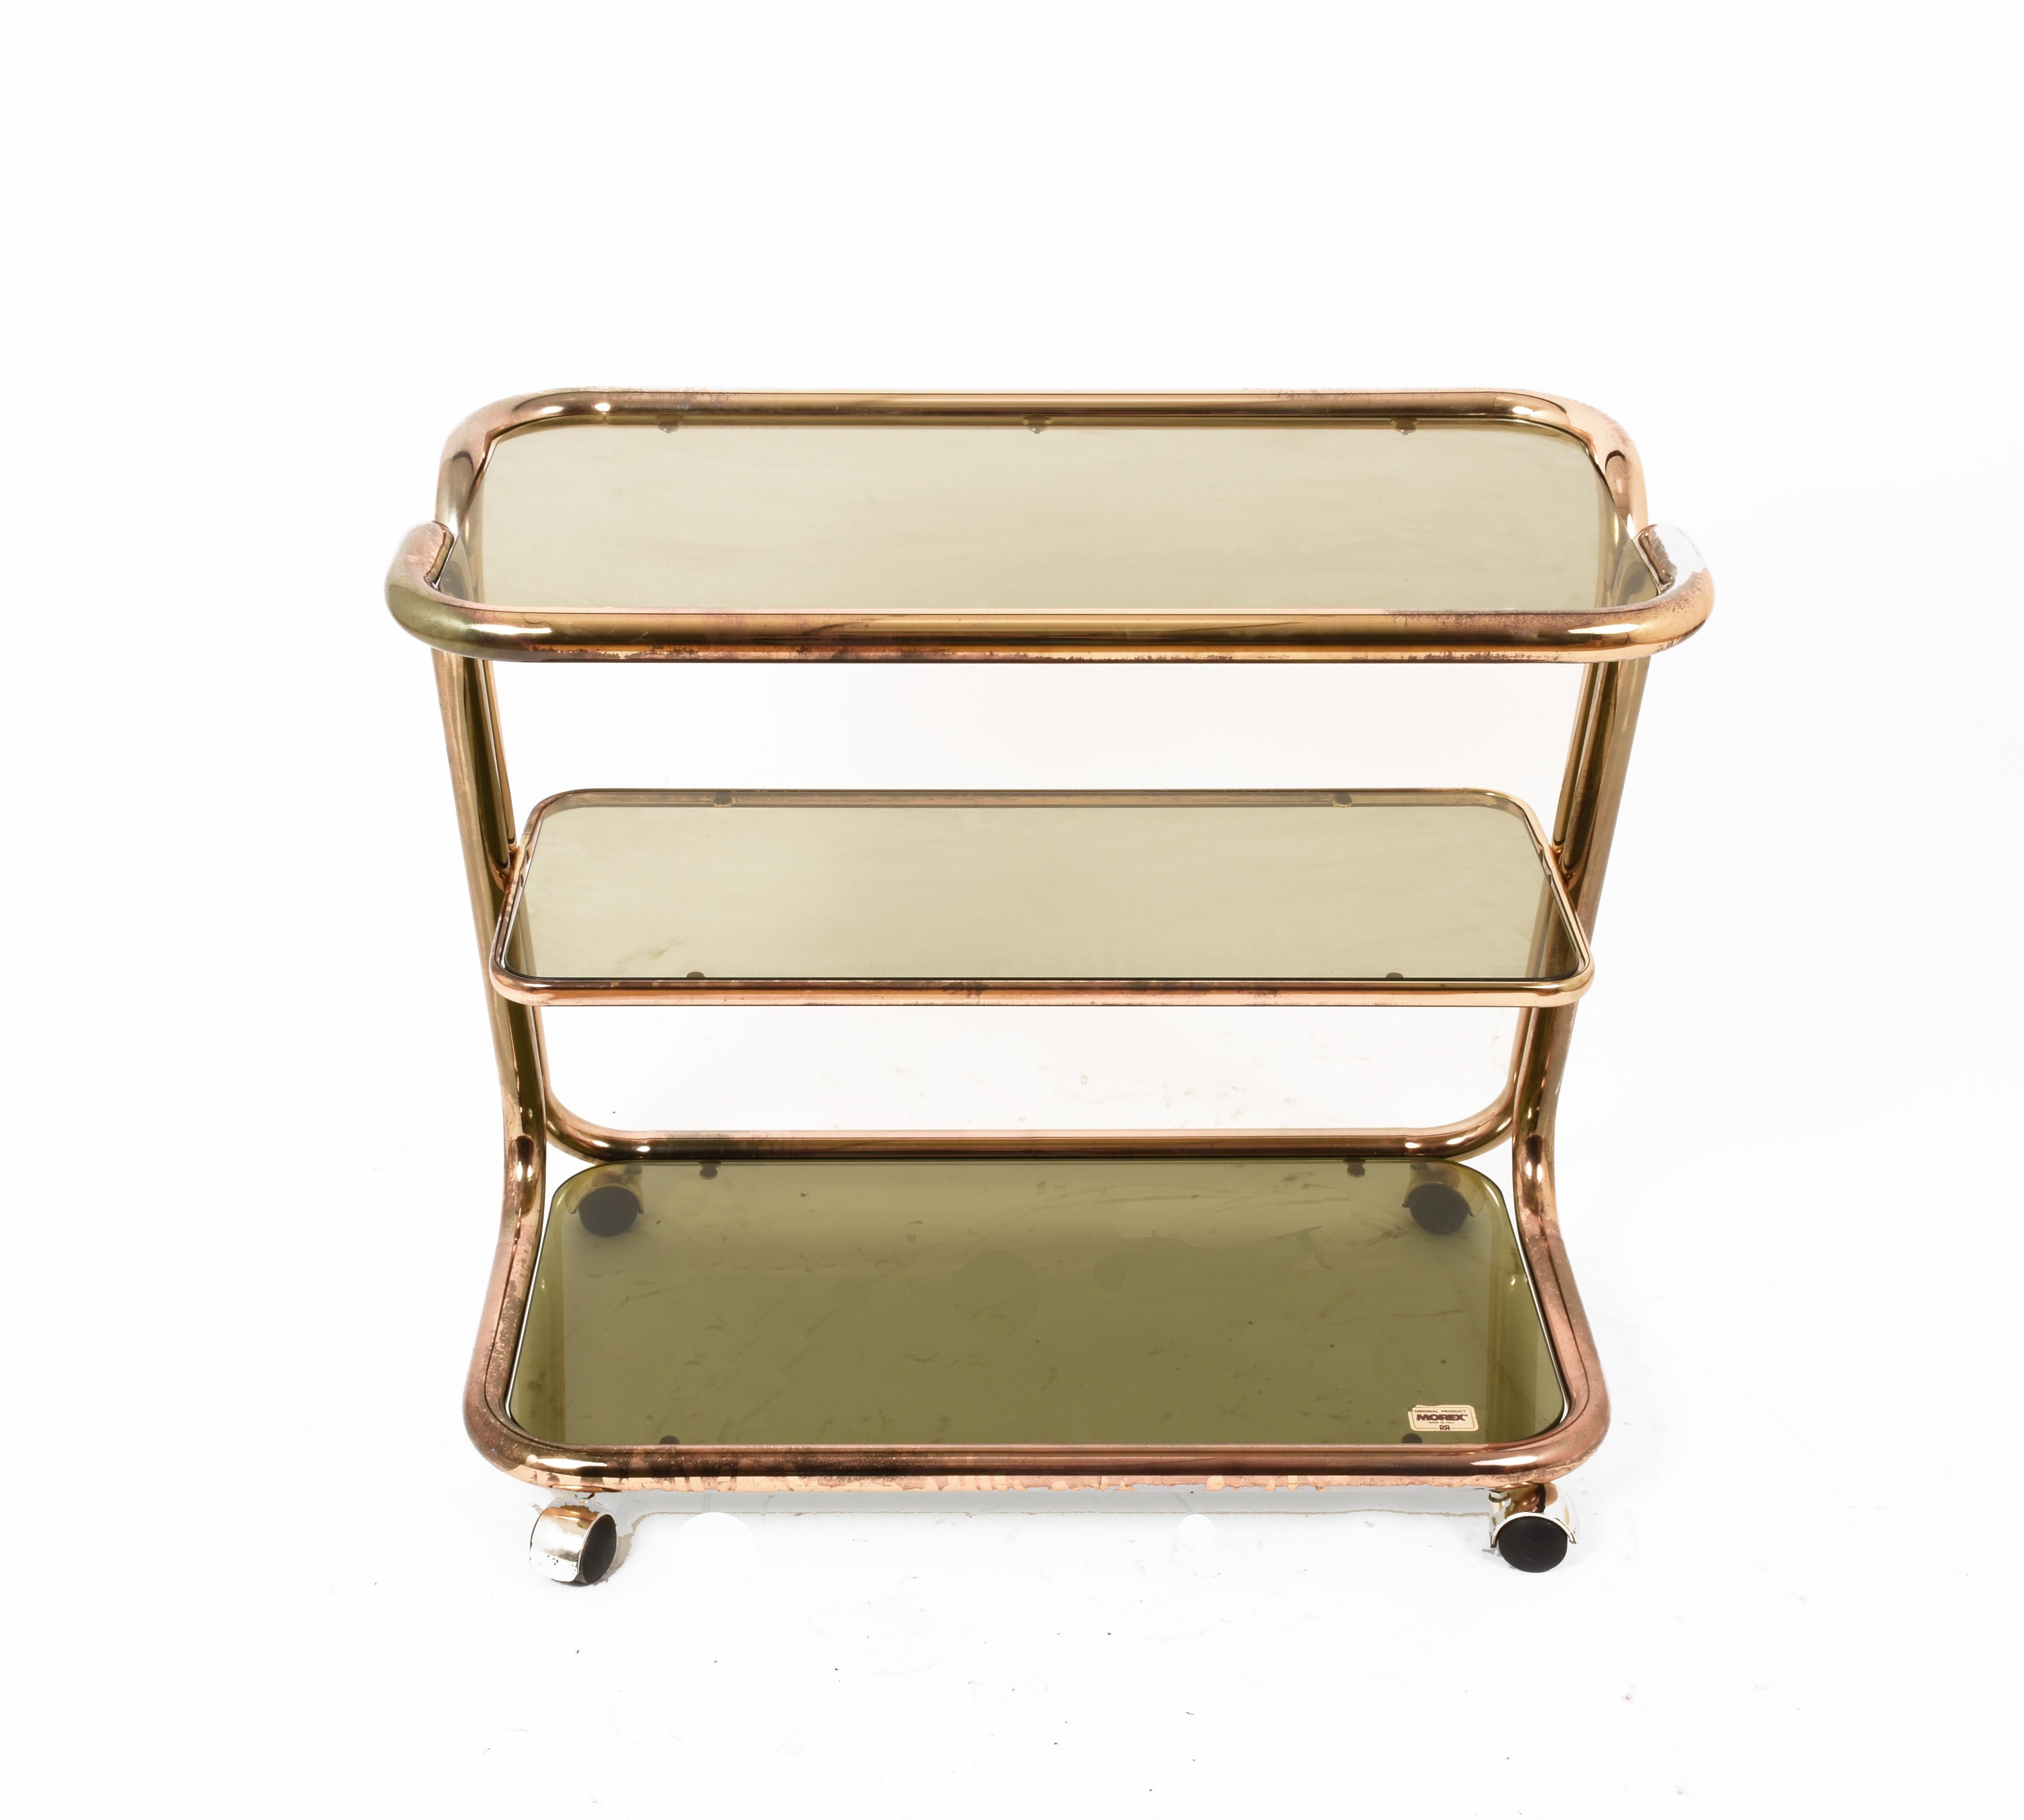 Exceptional midcentury brass and smoked glass bar cart on three levels. This three-level service cart was produced by Morex in Italy during 1970s.

The elegance of this wonderful piece is due to the tubular, delicate brass structure and the olive